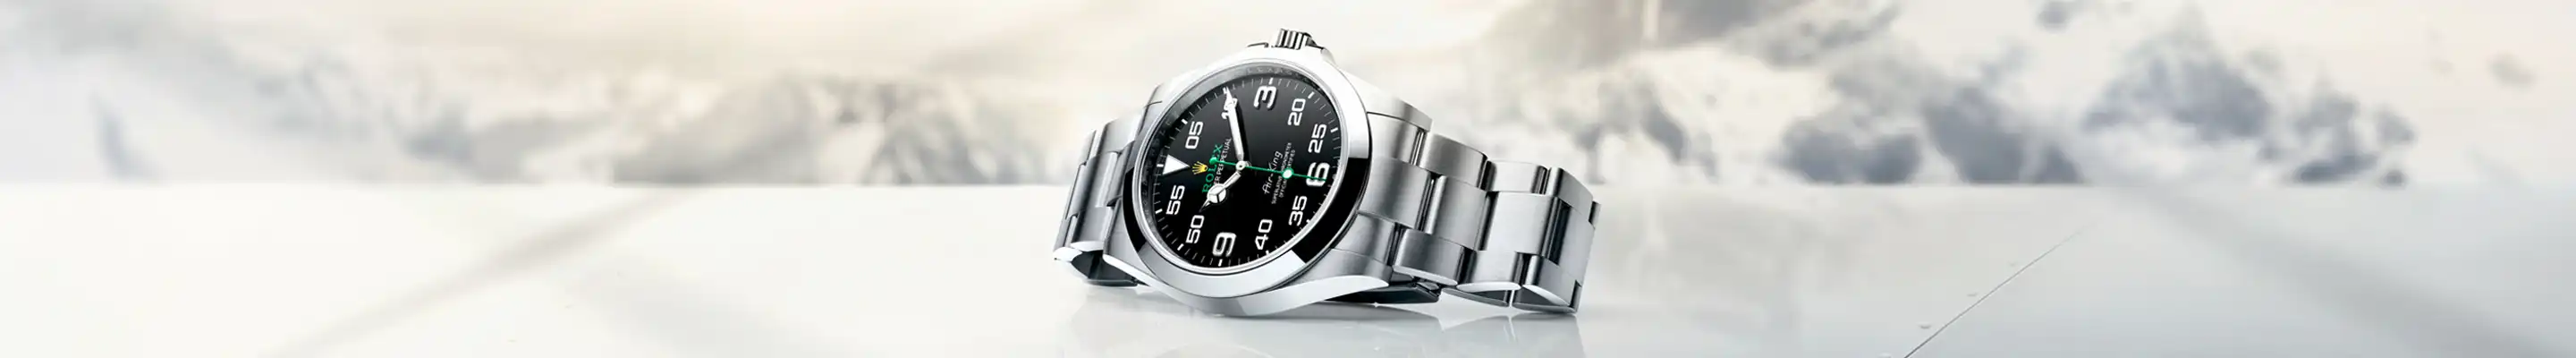 Rolex - Article: The sky is the limit